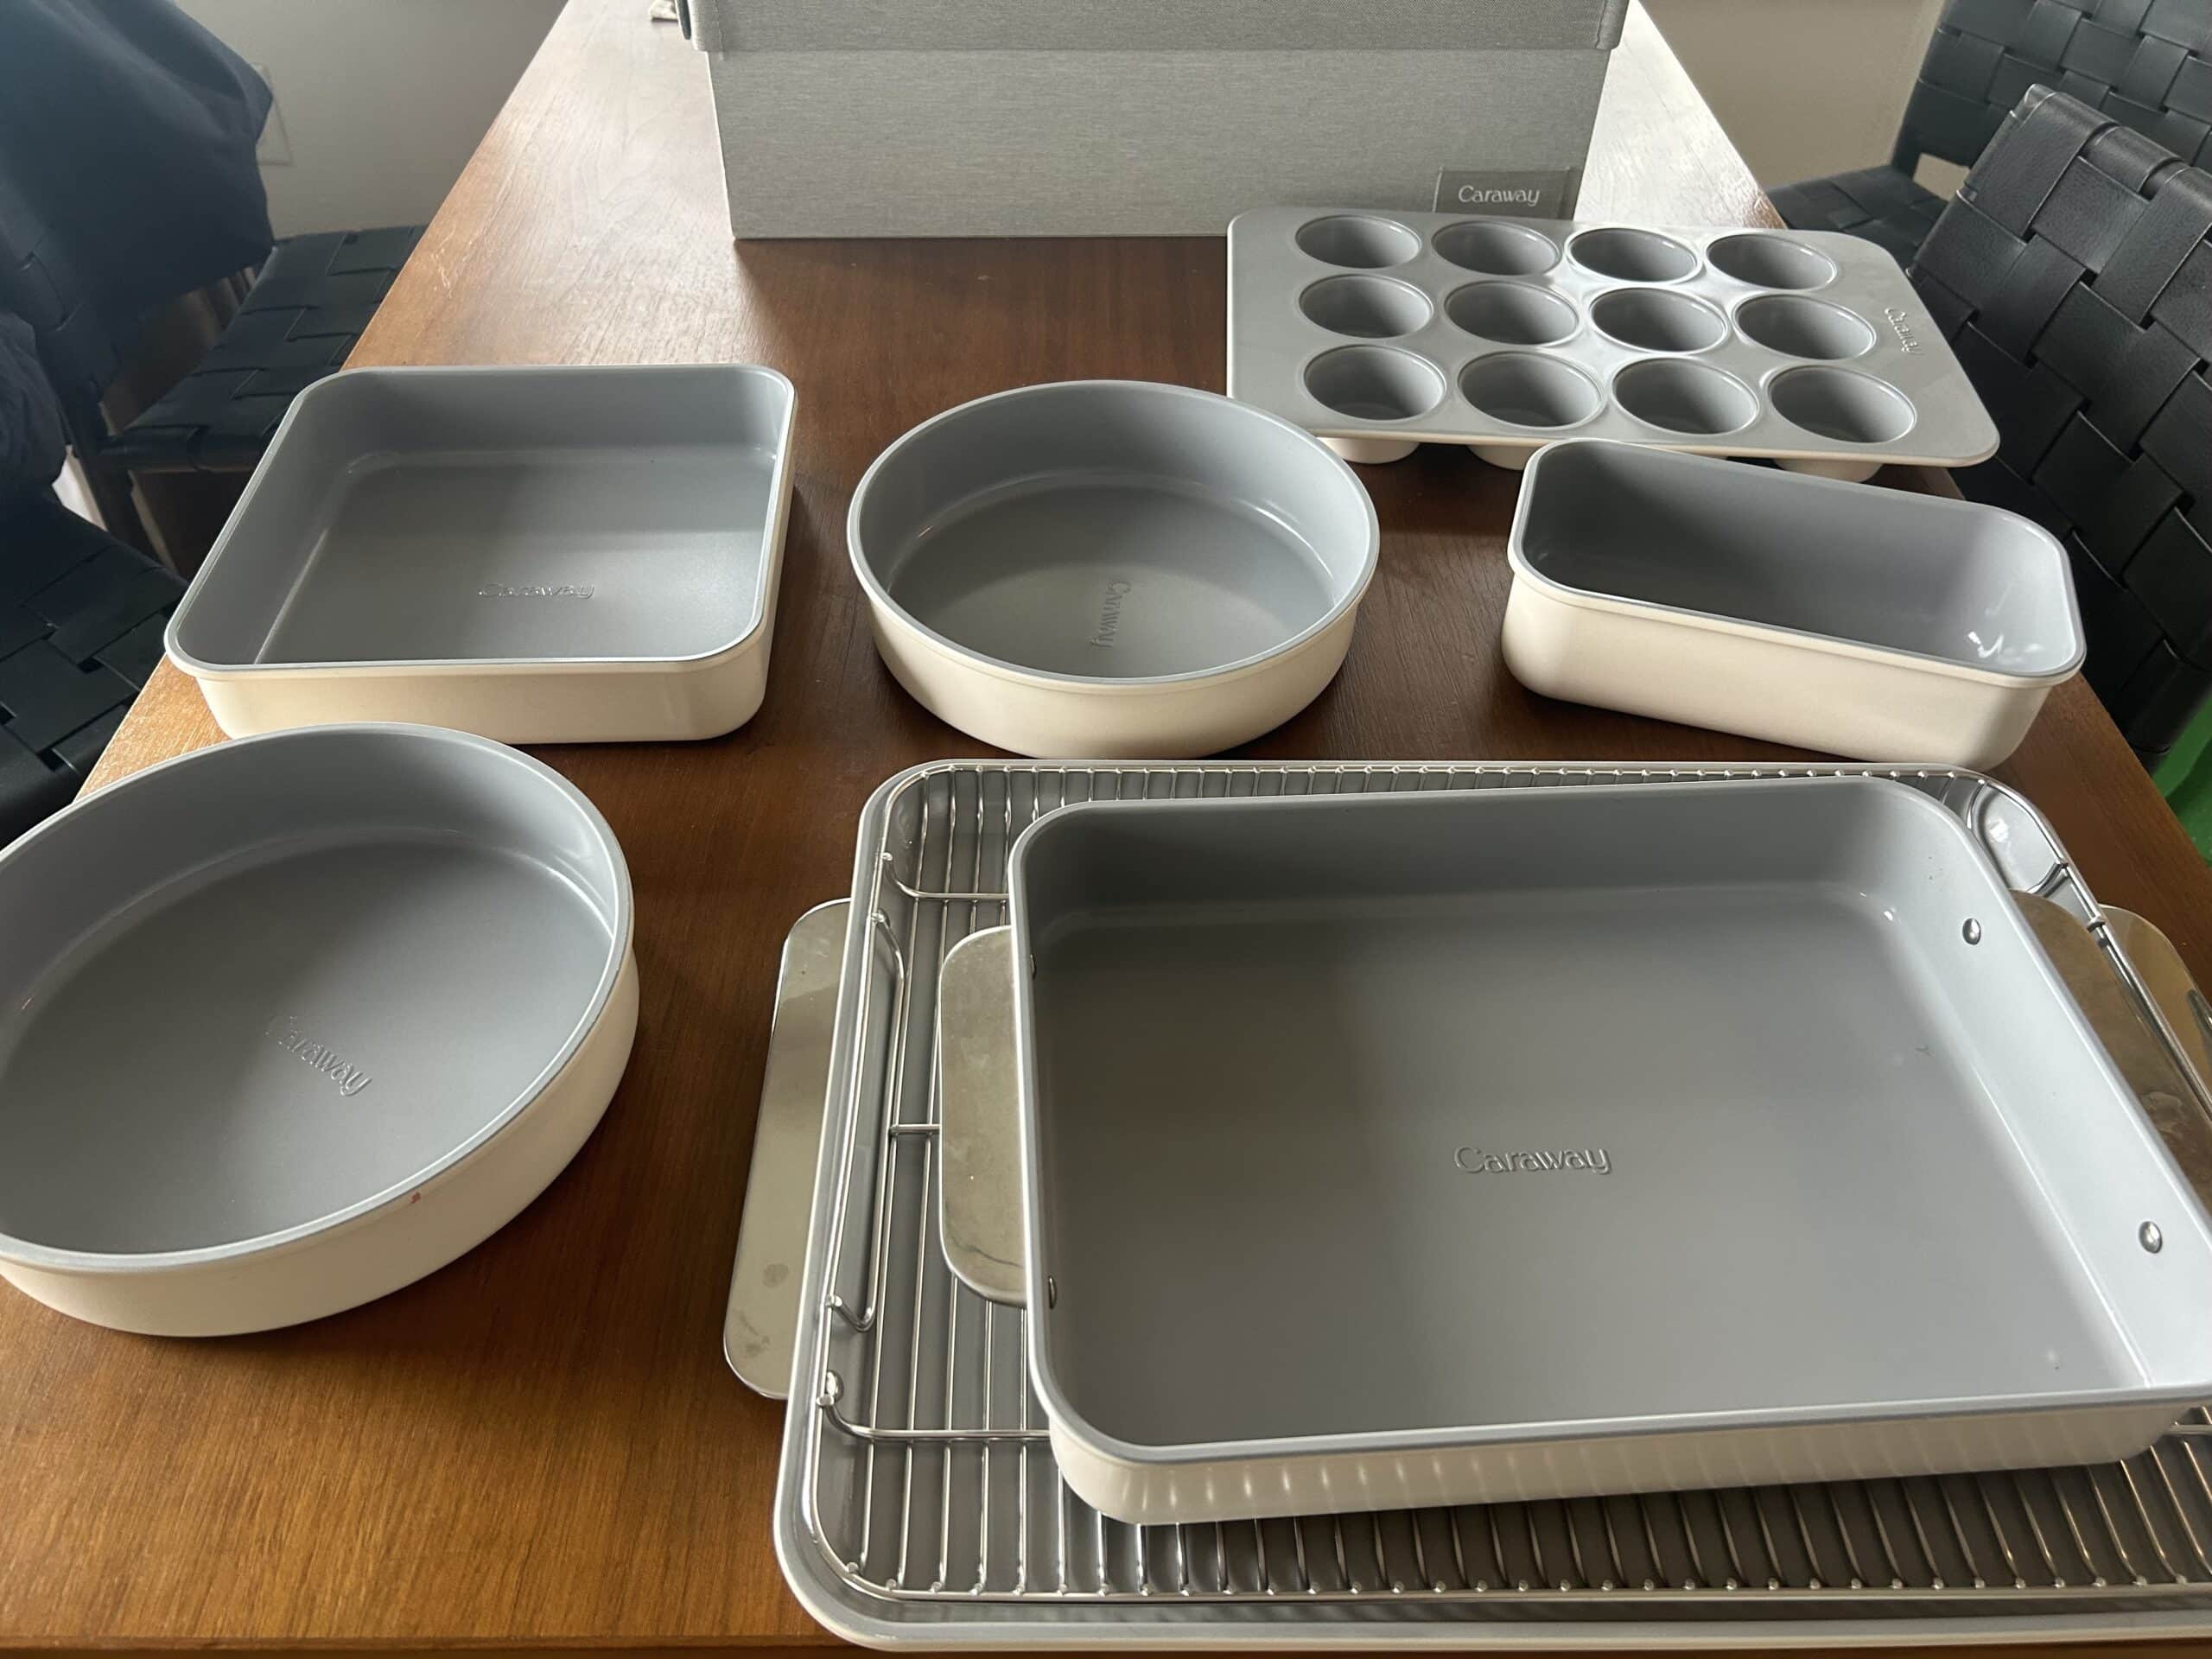 We Tested the Caraway Storage Set Review